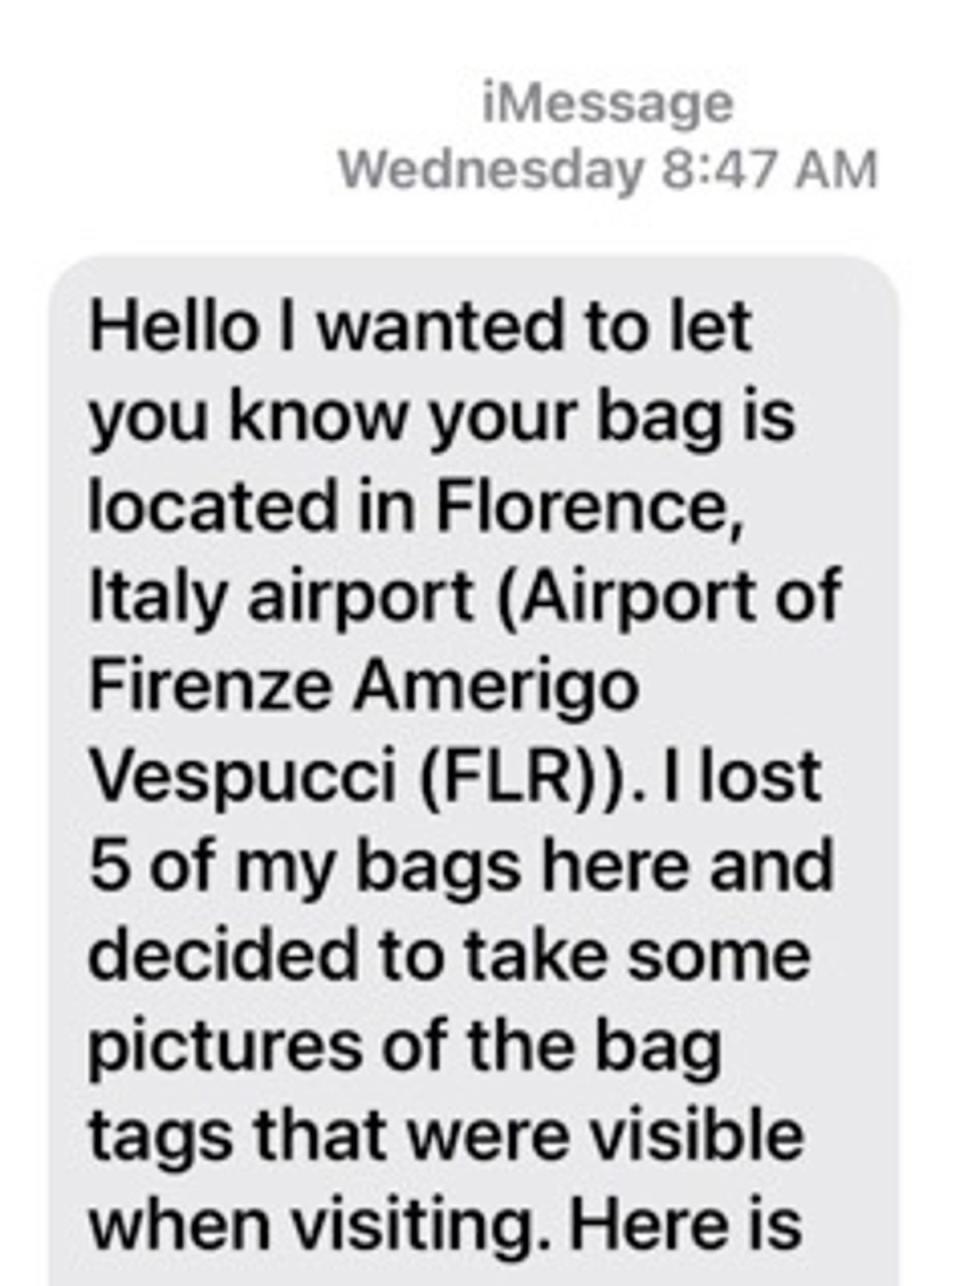 Lisa Khan received this text message from a stranger who had found her bag in Italy (Courtesy of Lisa Khan)